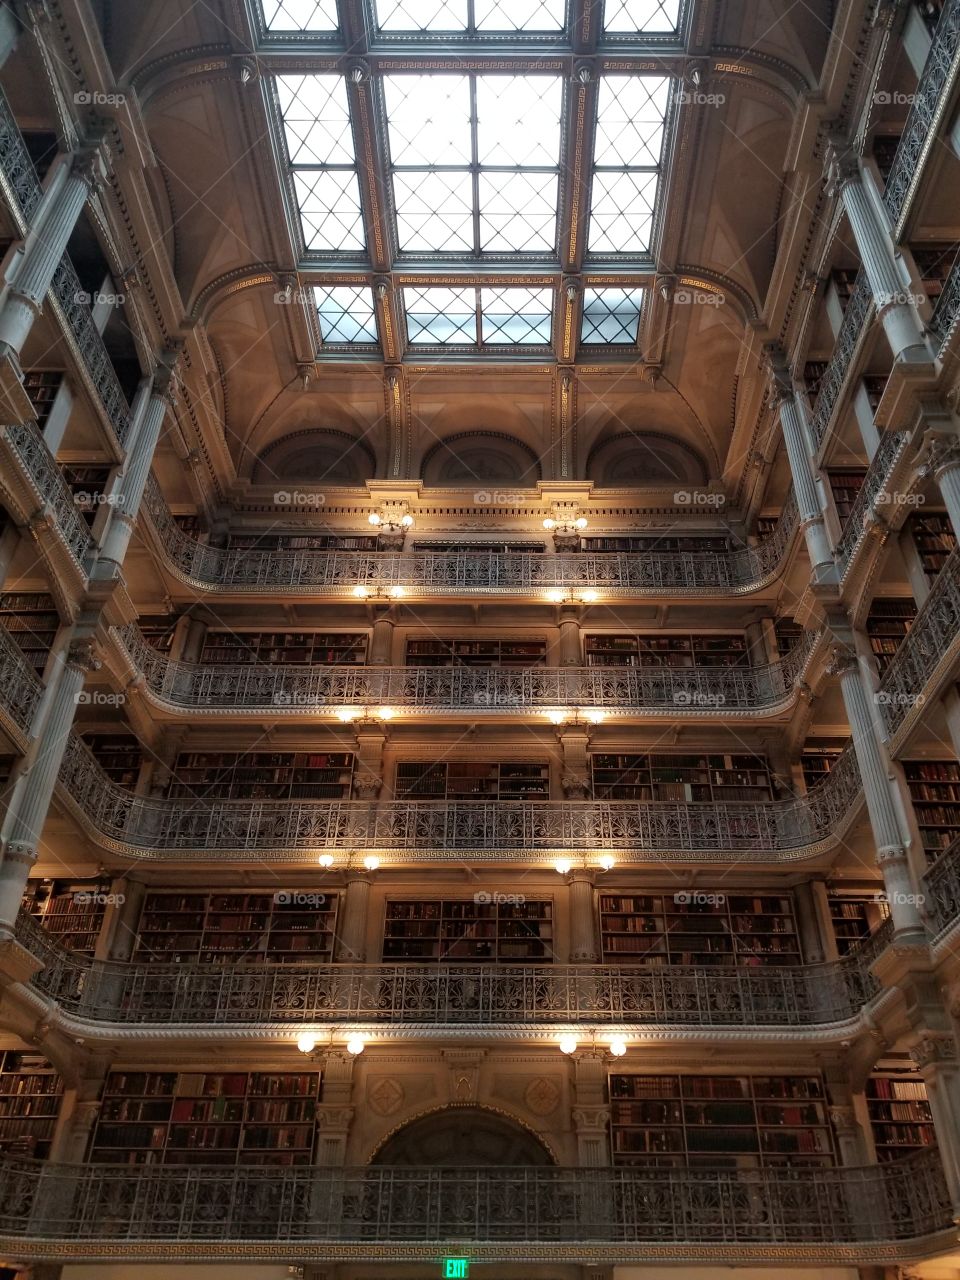 George Peabody Library, at John Hopkins university. "Cathedral of Books". Stunning 5 stories of knowledge. Exquisite architectural design.